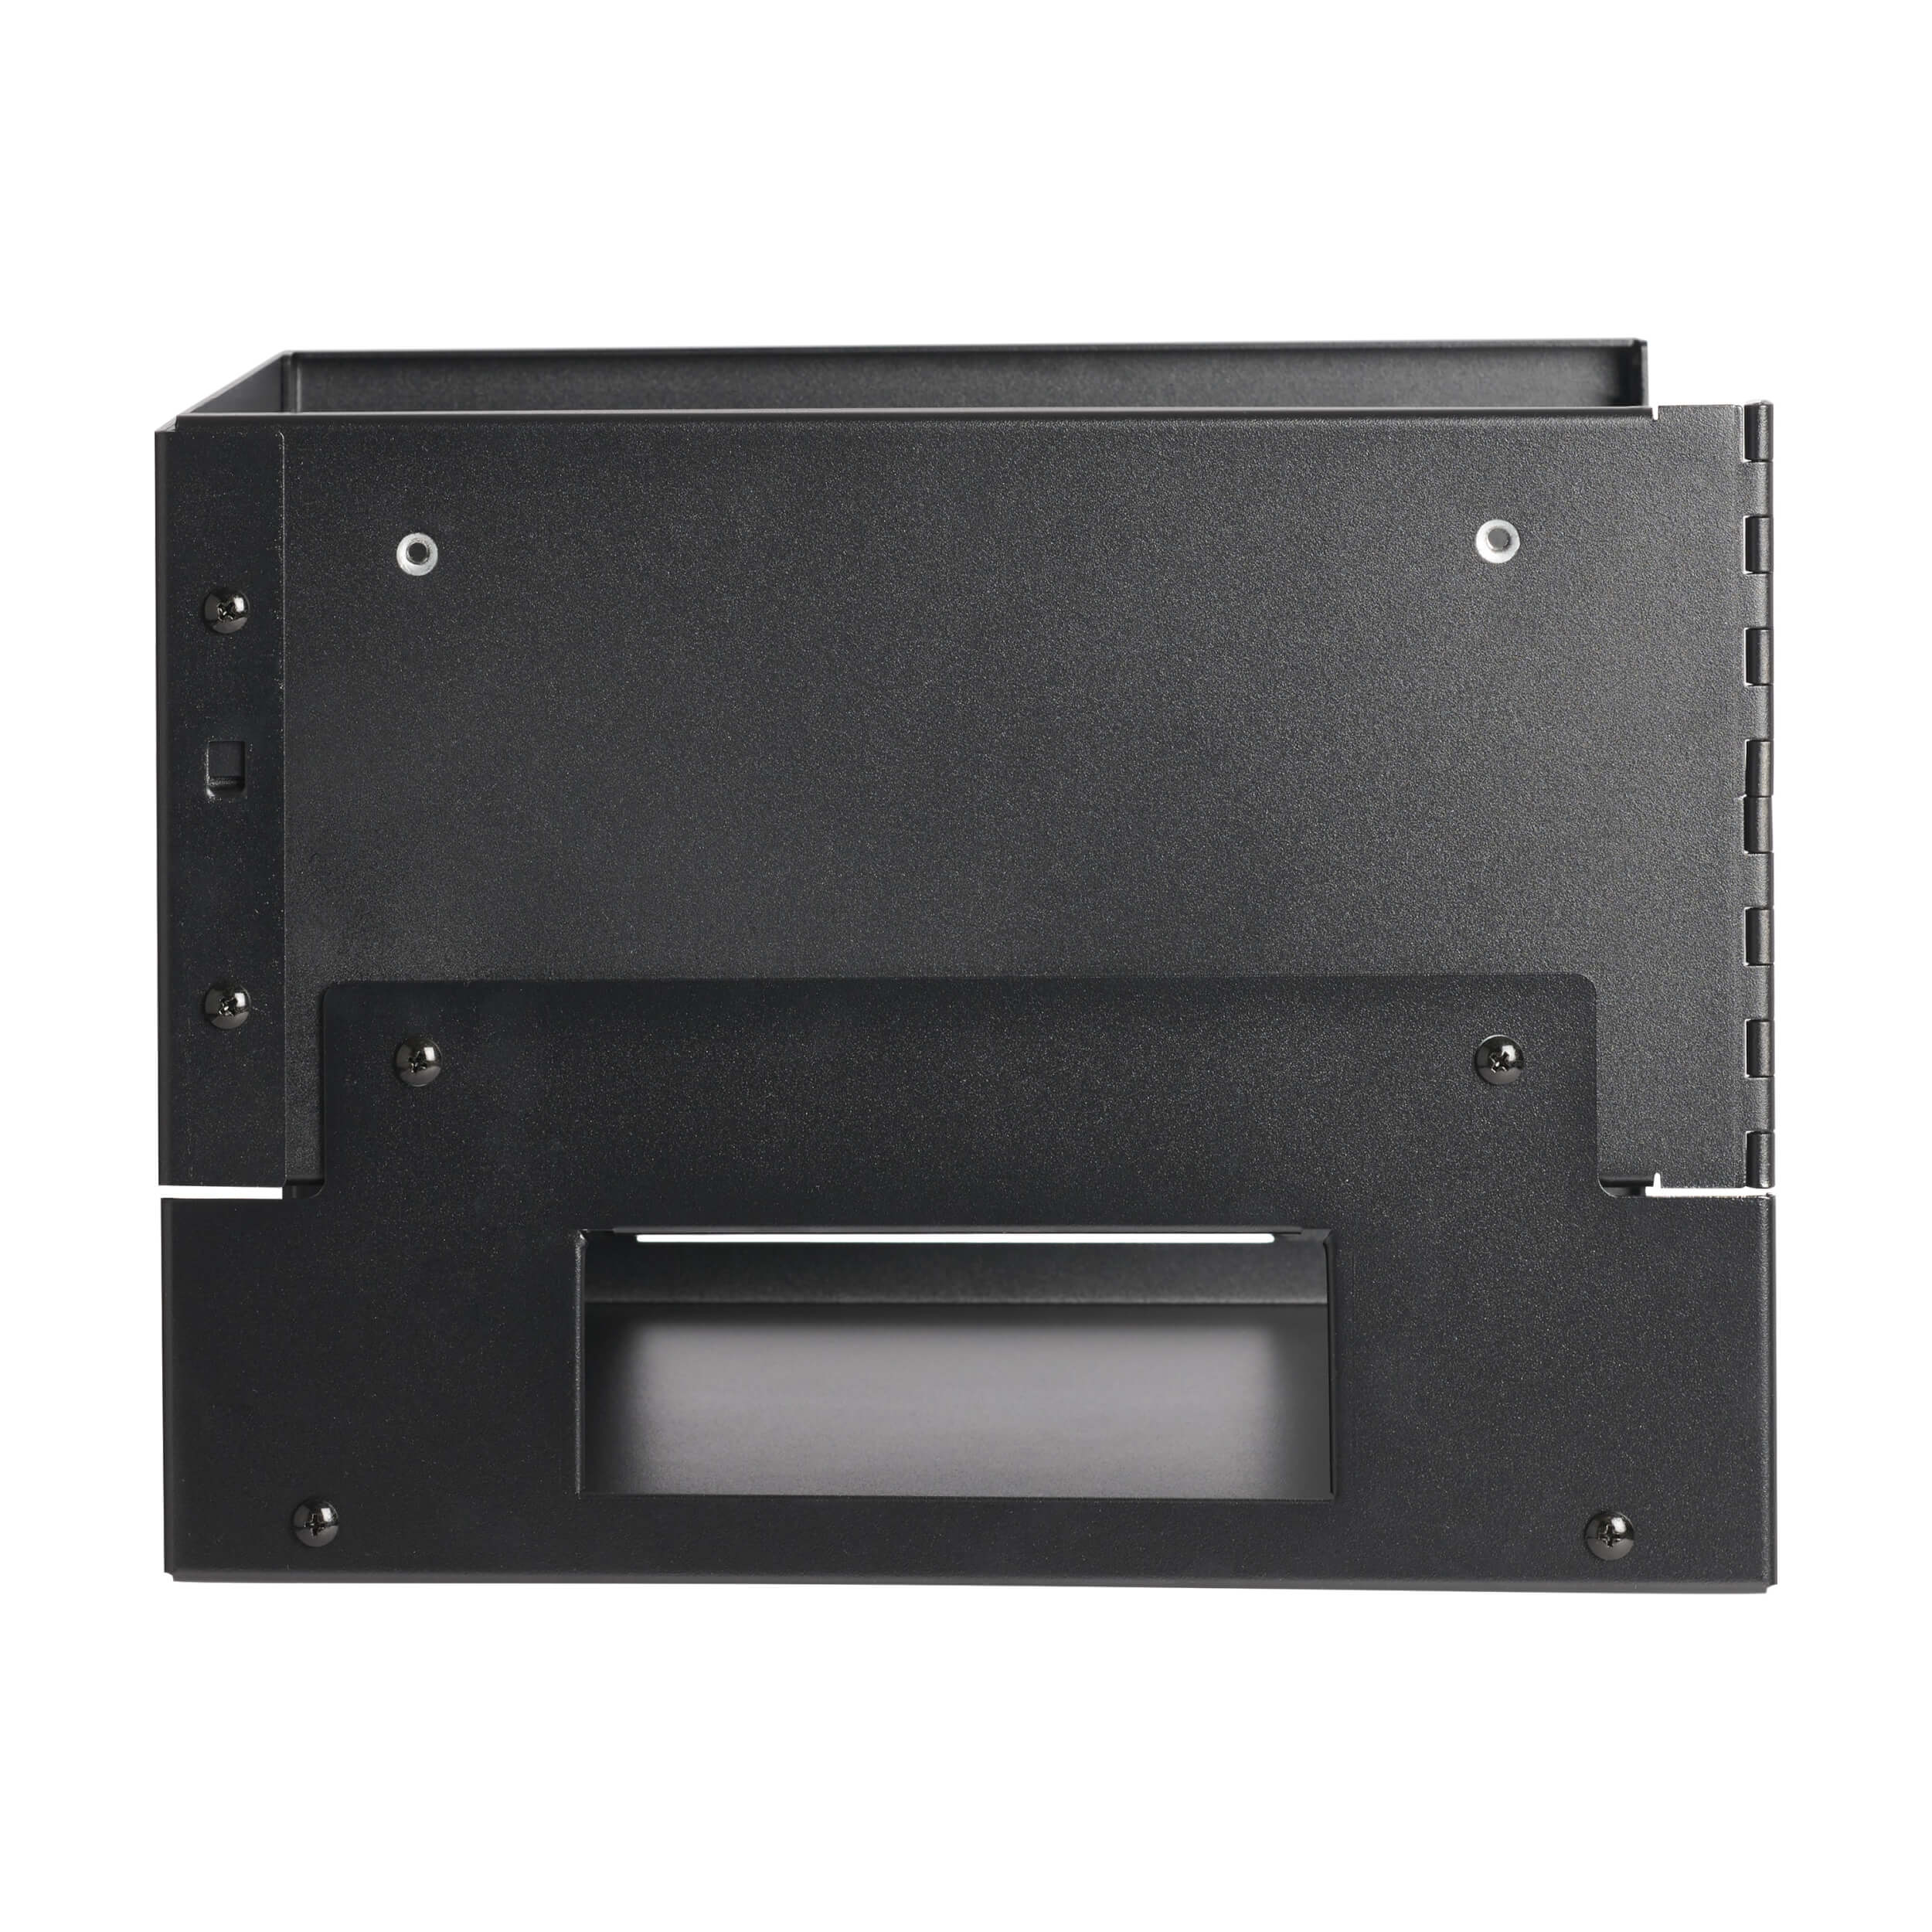 4U Shelved Wall-Mount Hinged Bracket for Small Switches, Patch Panels ...